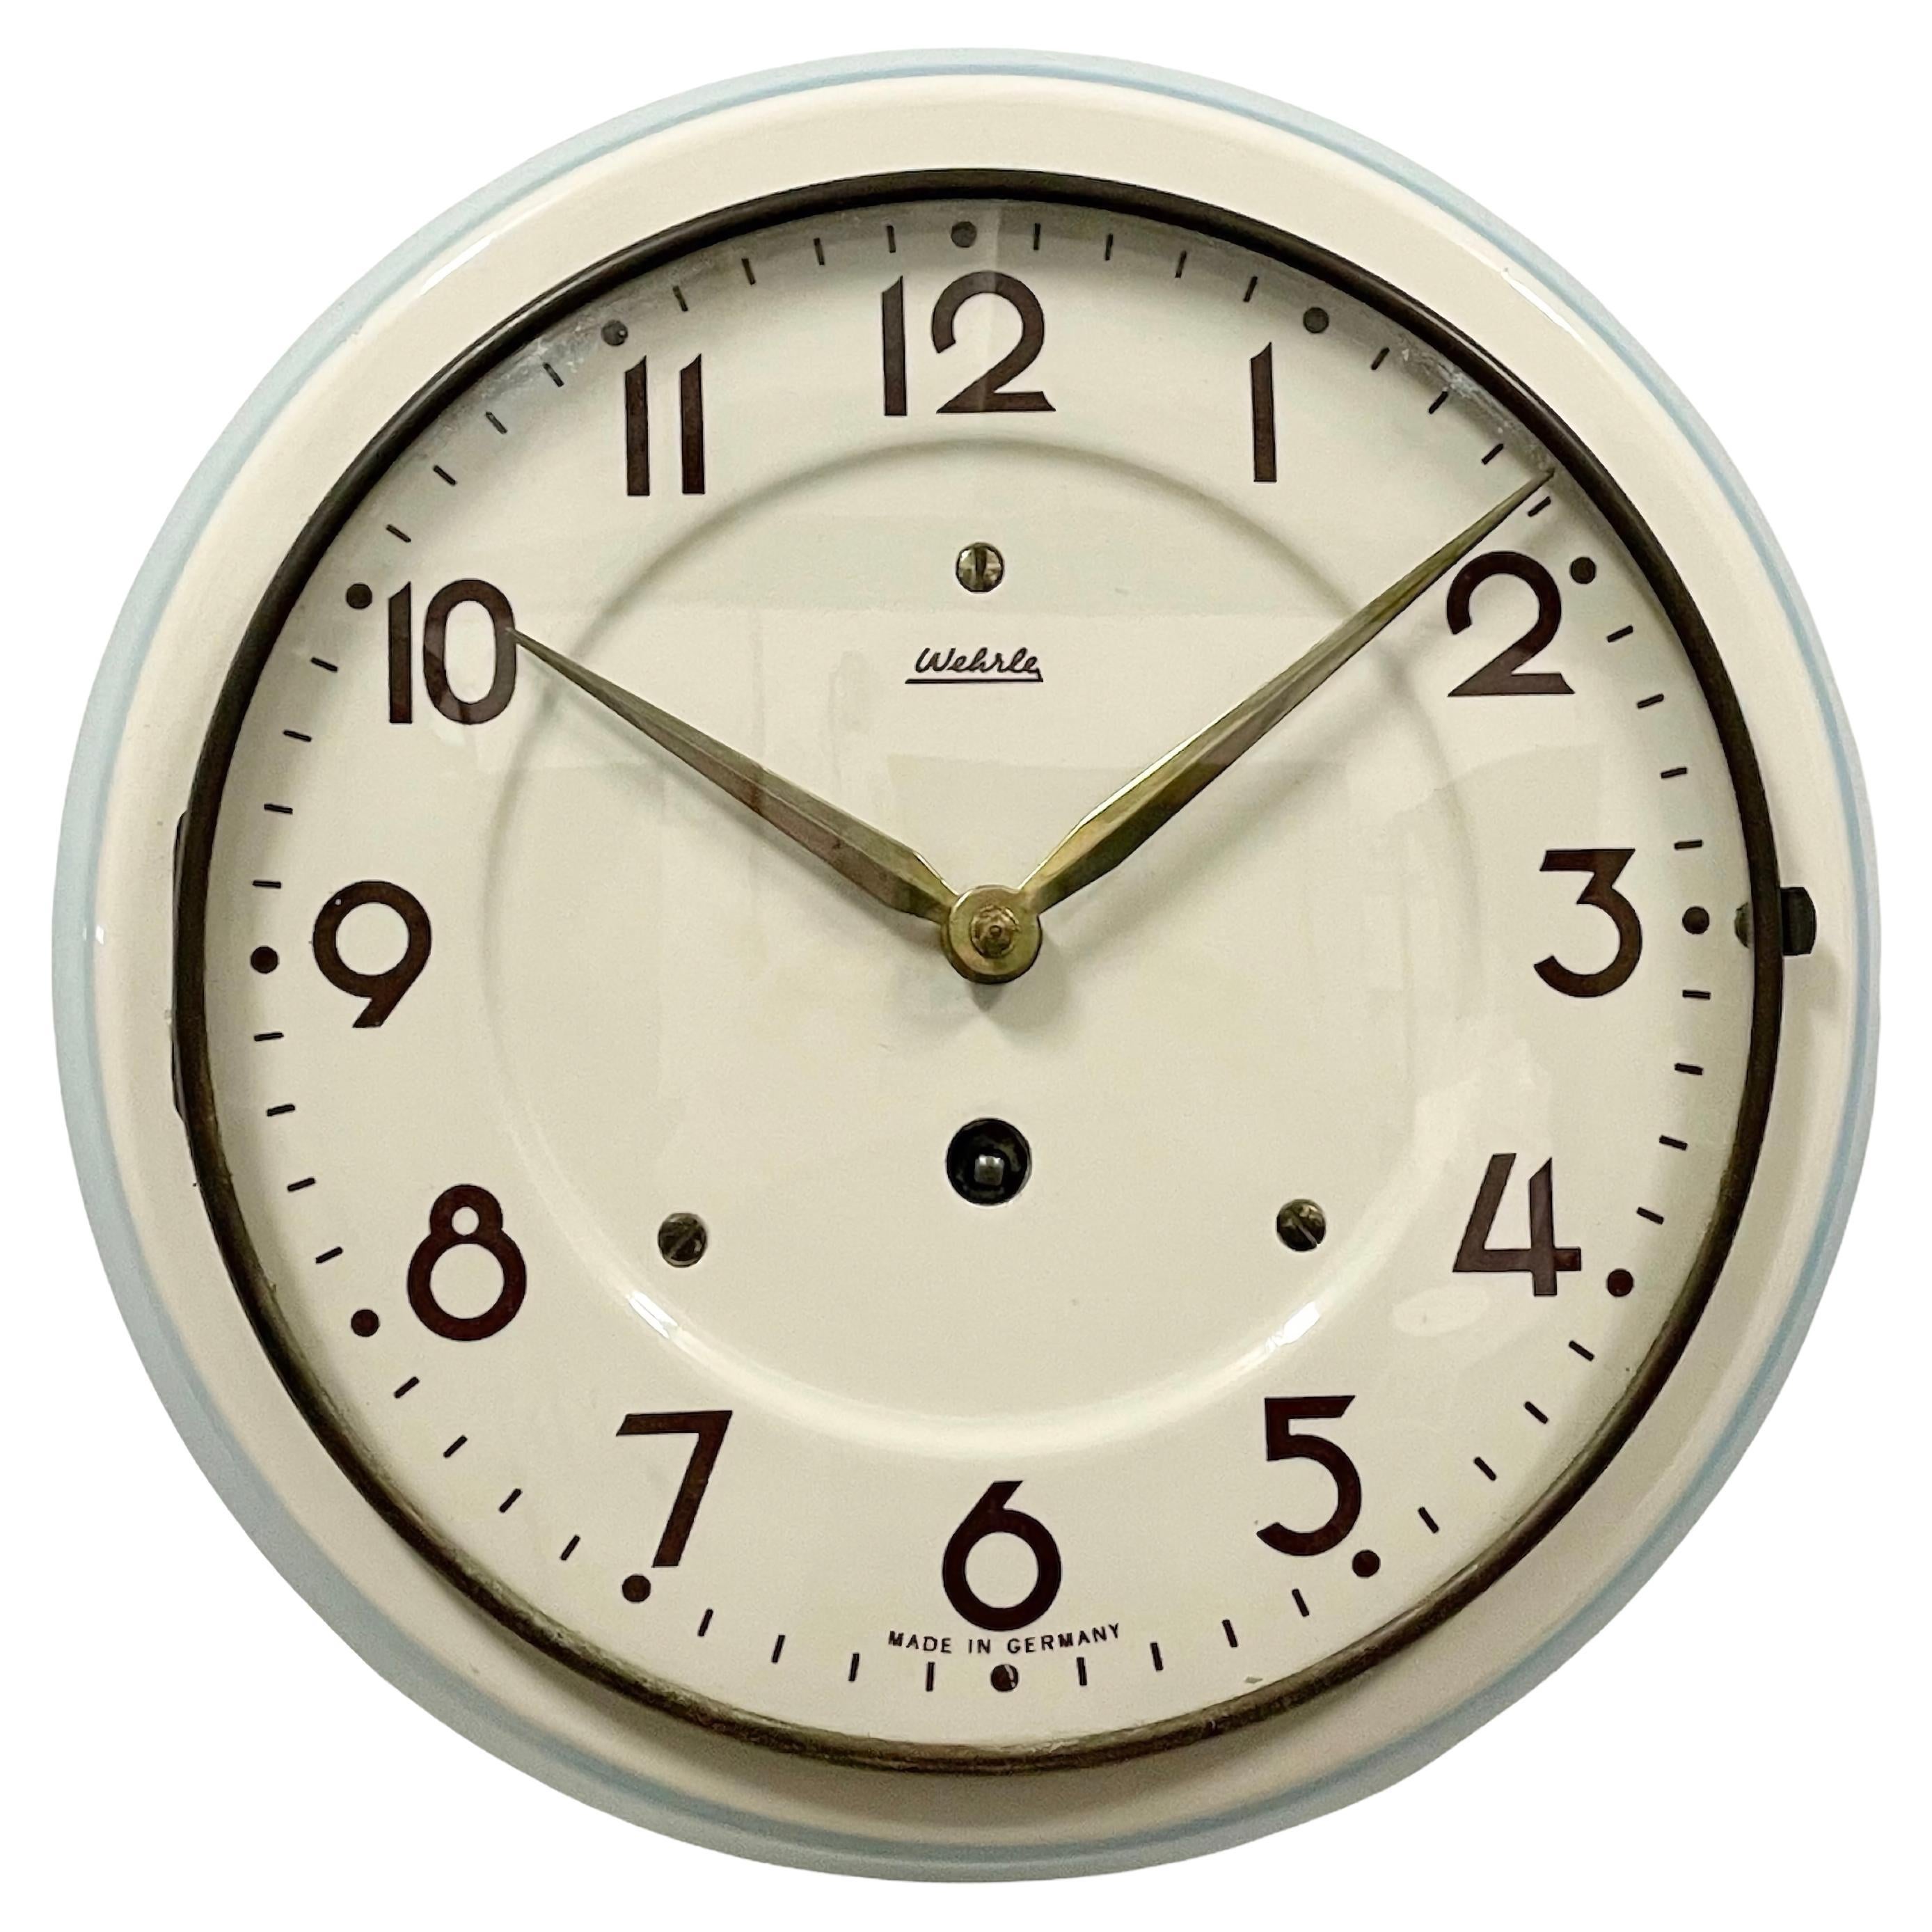 German Mechanical Ceramic Wall Clock from Wehrle, 1960s